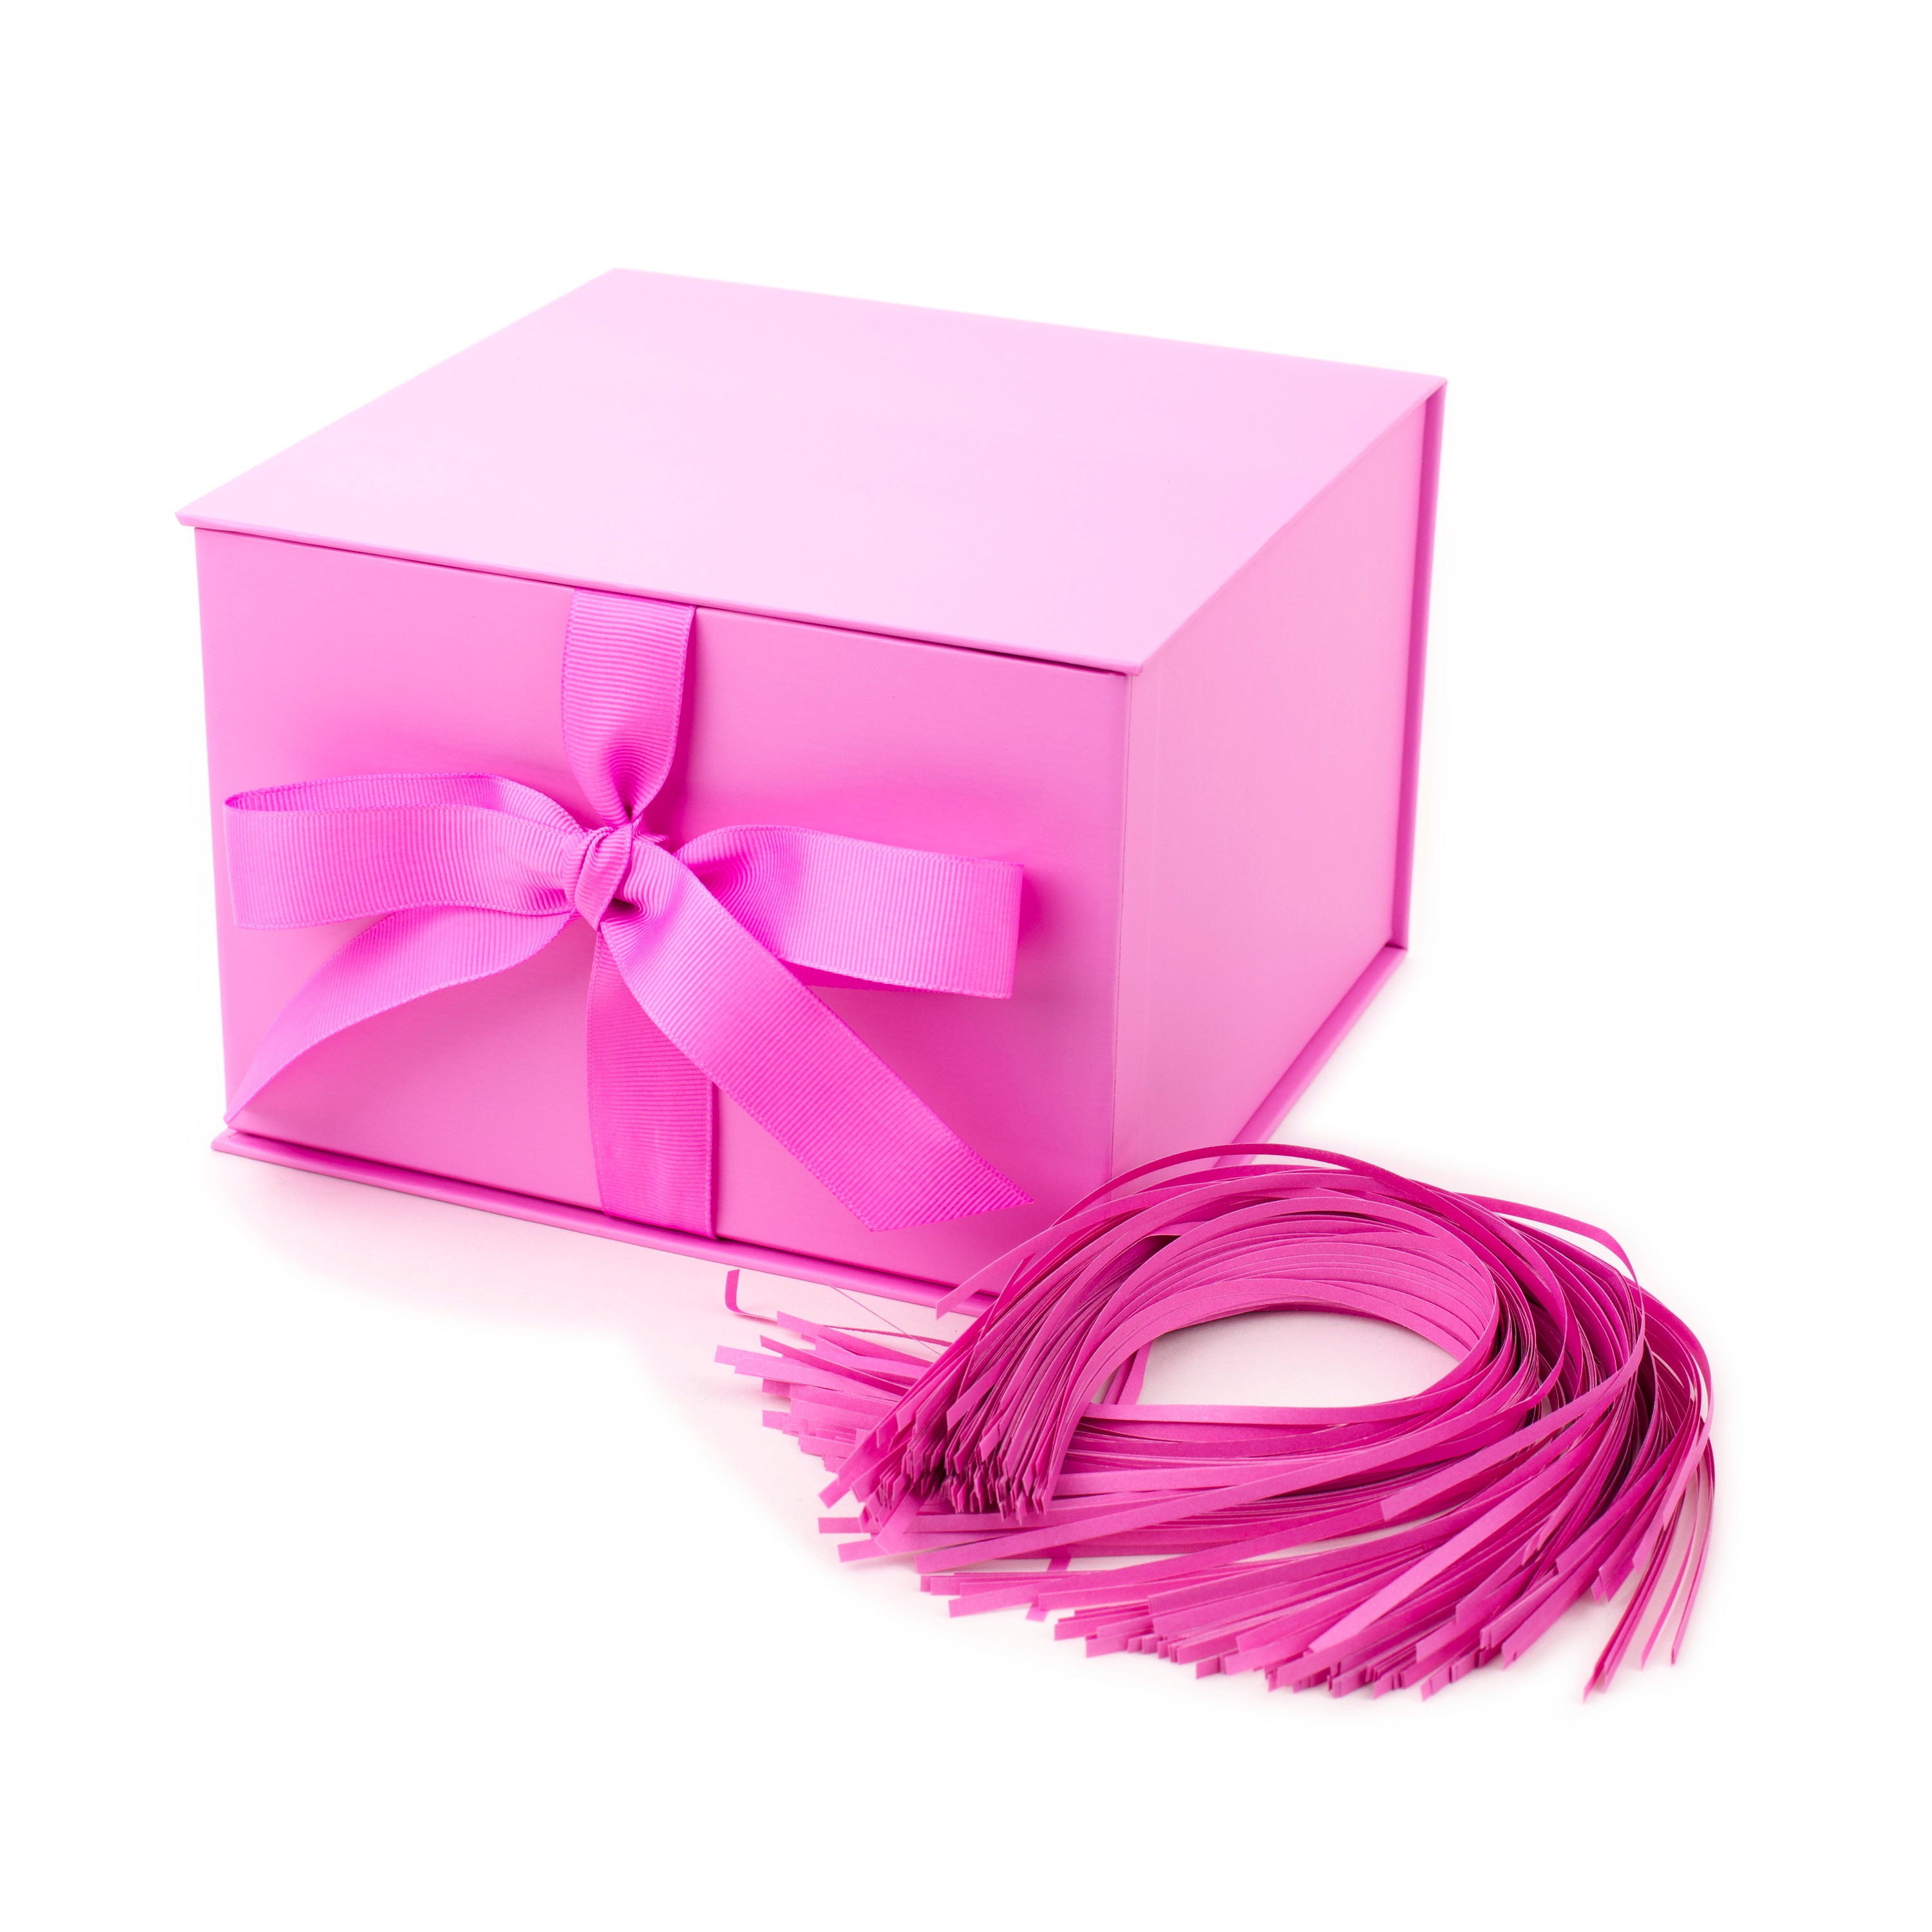 Hallmark 7" Large Gift Box (Light Pink) for Birthdays, Bridal Showers, Weddings, Baby Showers and More